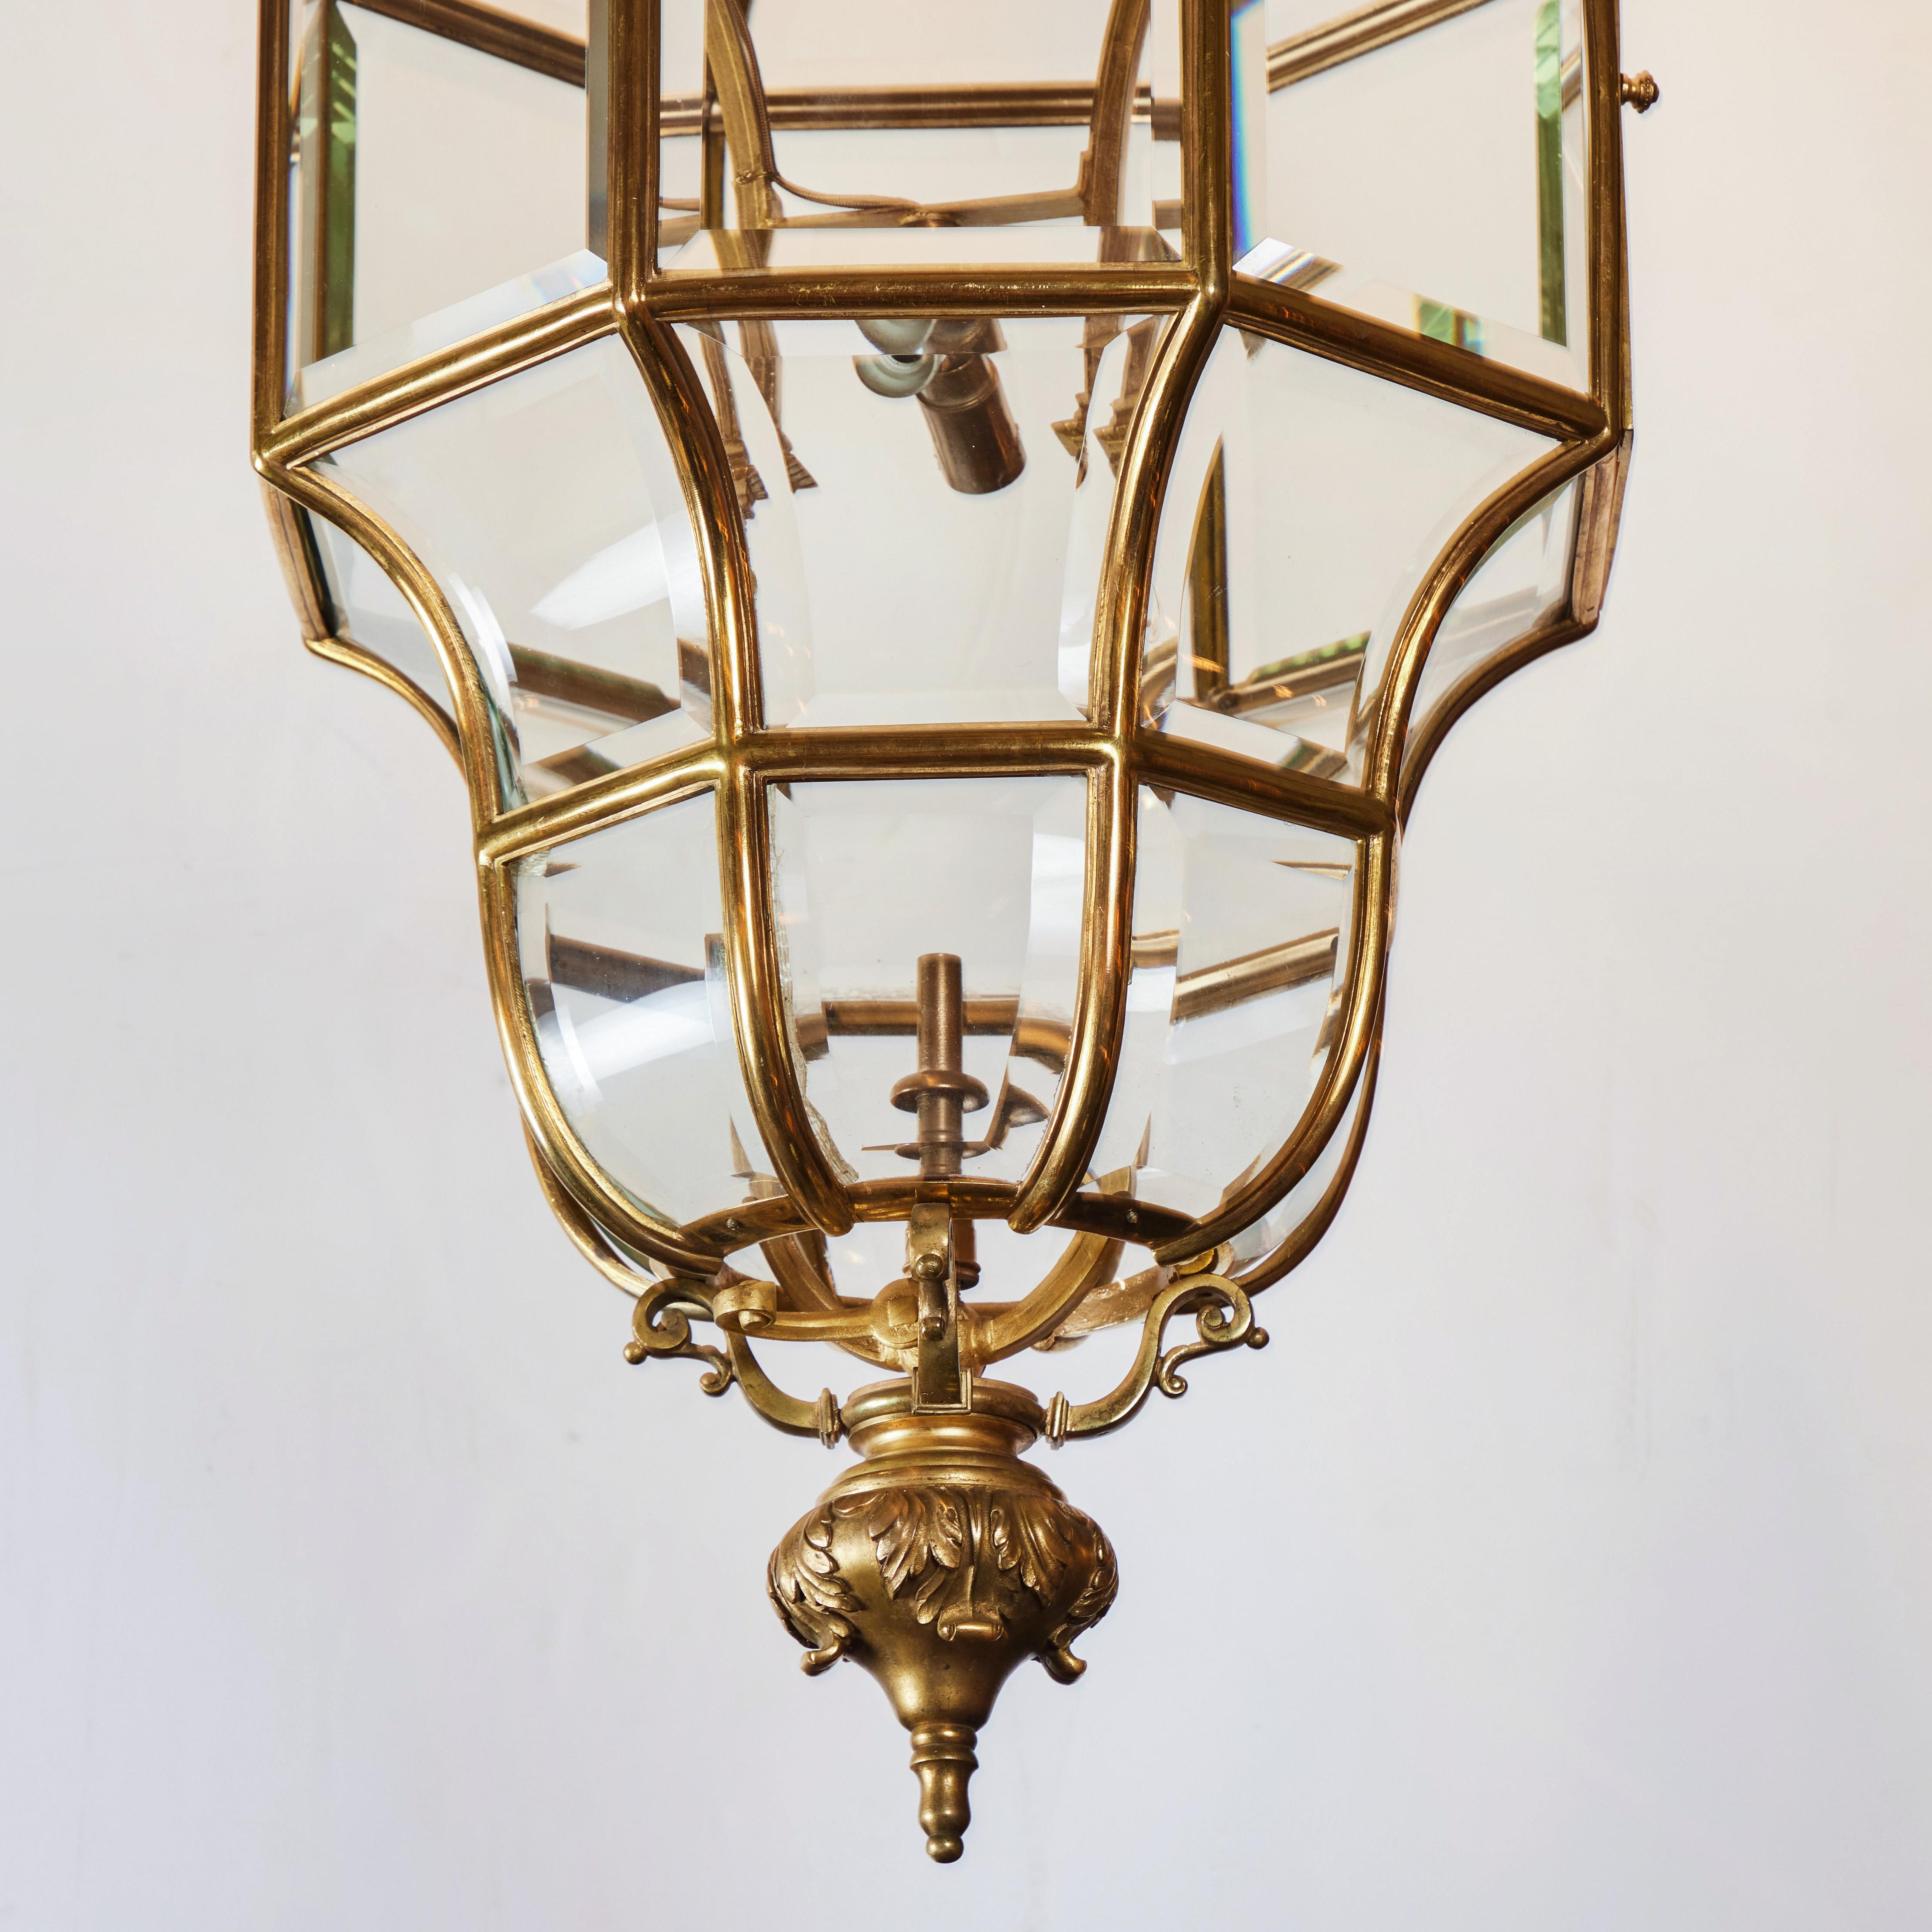 Elegant octagon shaped gold dore bronze gas lantern, later electrified with original beveled glass. Elaborate crown features fleur de lis and foliate designs. 2 lights, wired for USA.